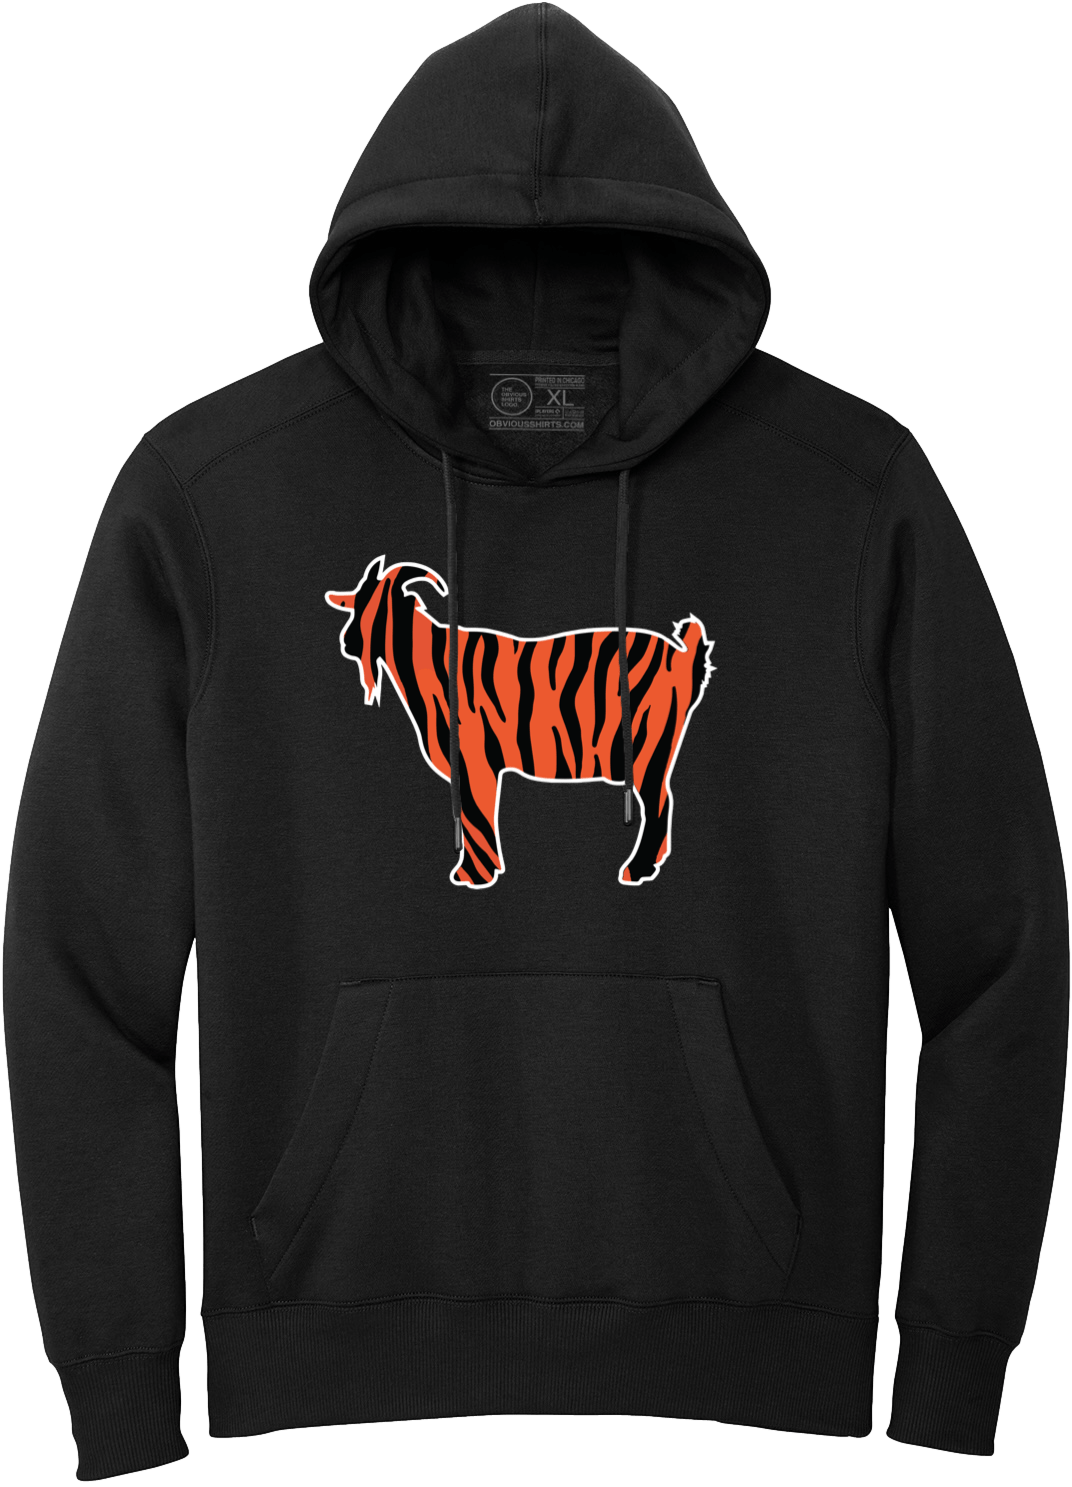 THE TIGER GOAT. (BLACK HOODED SWEATSHIRT) - OBVIOUS SHIRTS